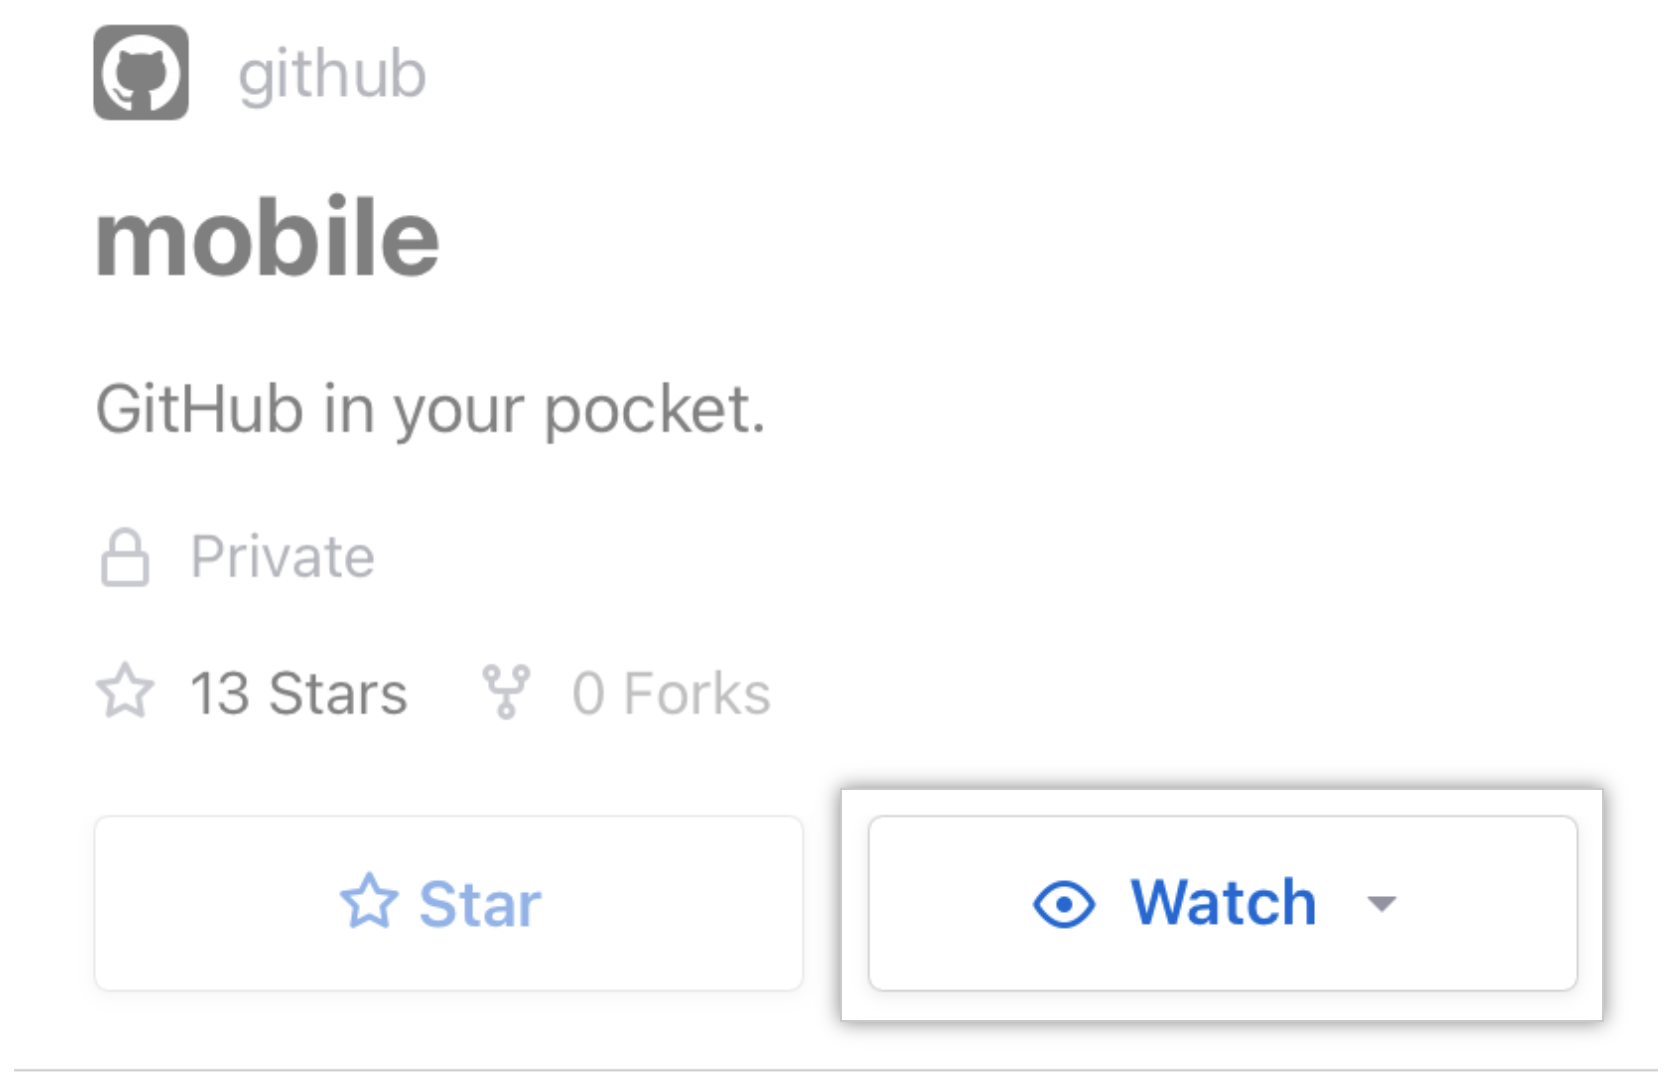 The watch button on GitHub Mobile